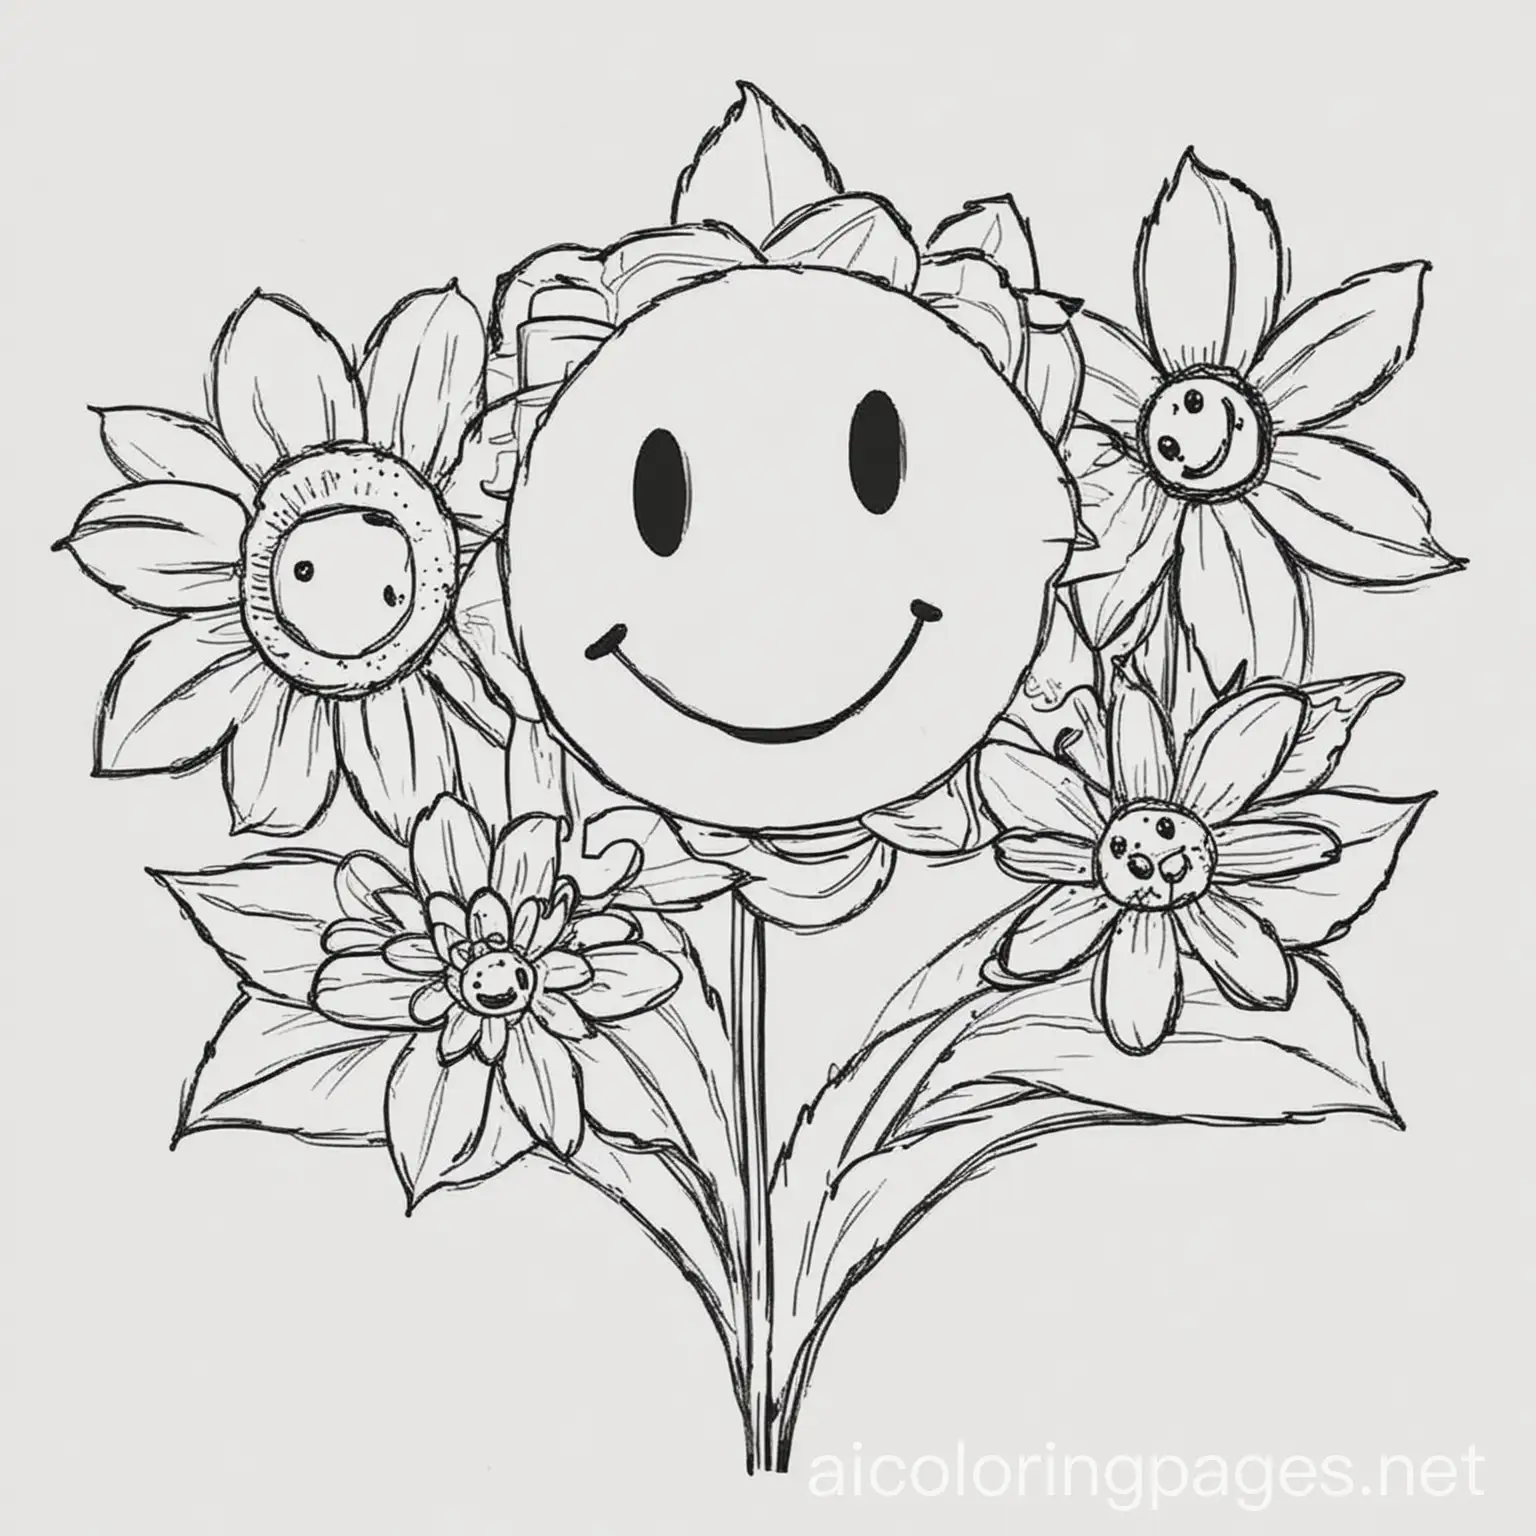 Cartoon-Flowers-with-Smiley-Faces-Coloring-Page